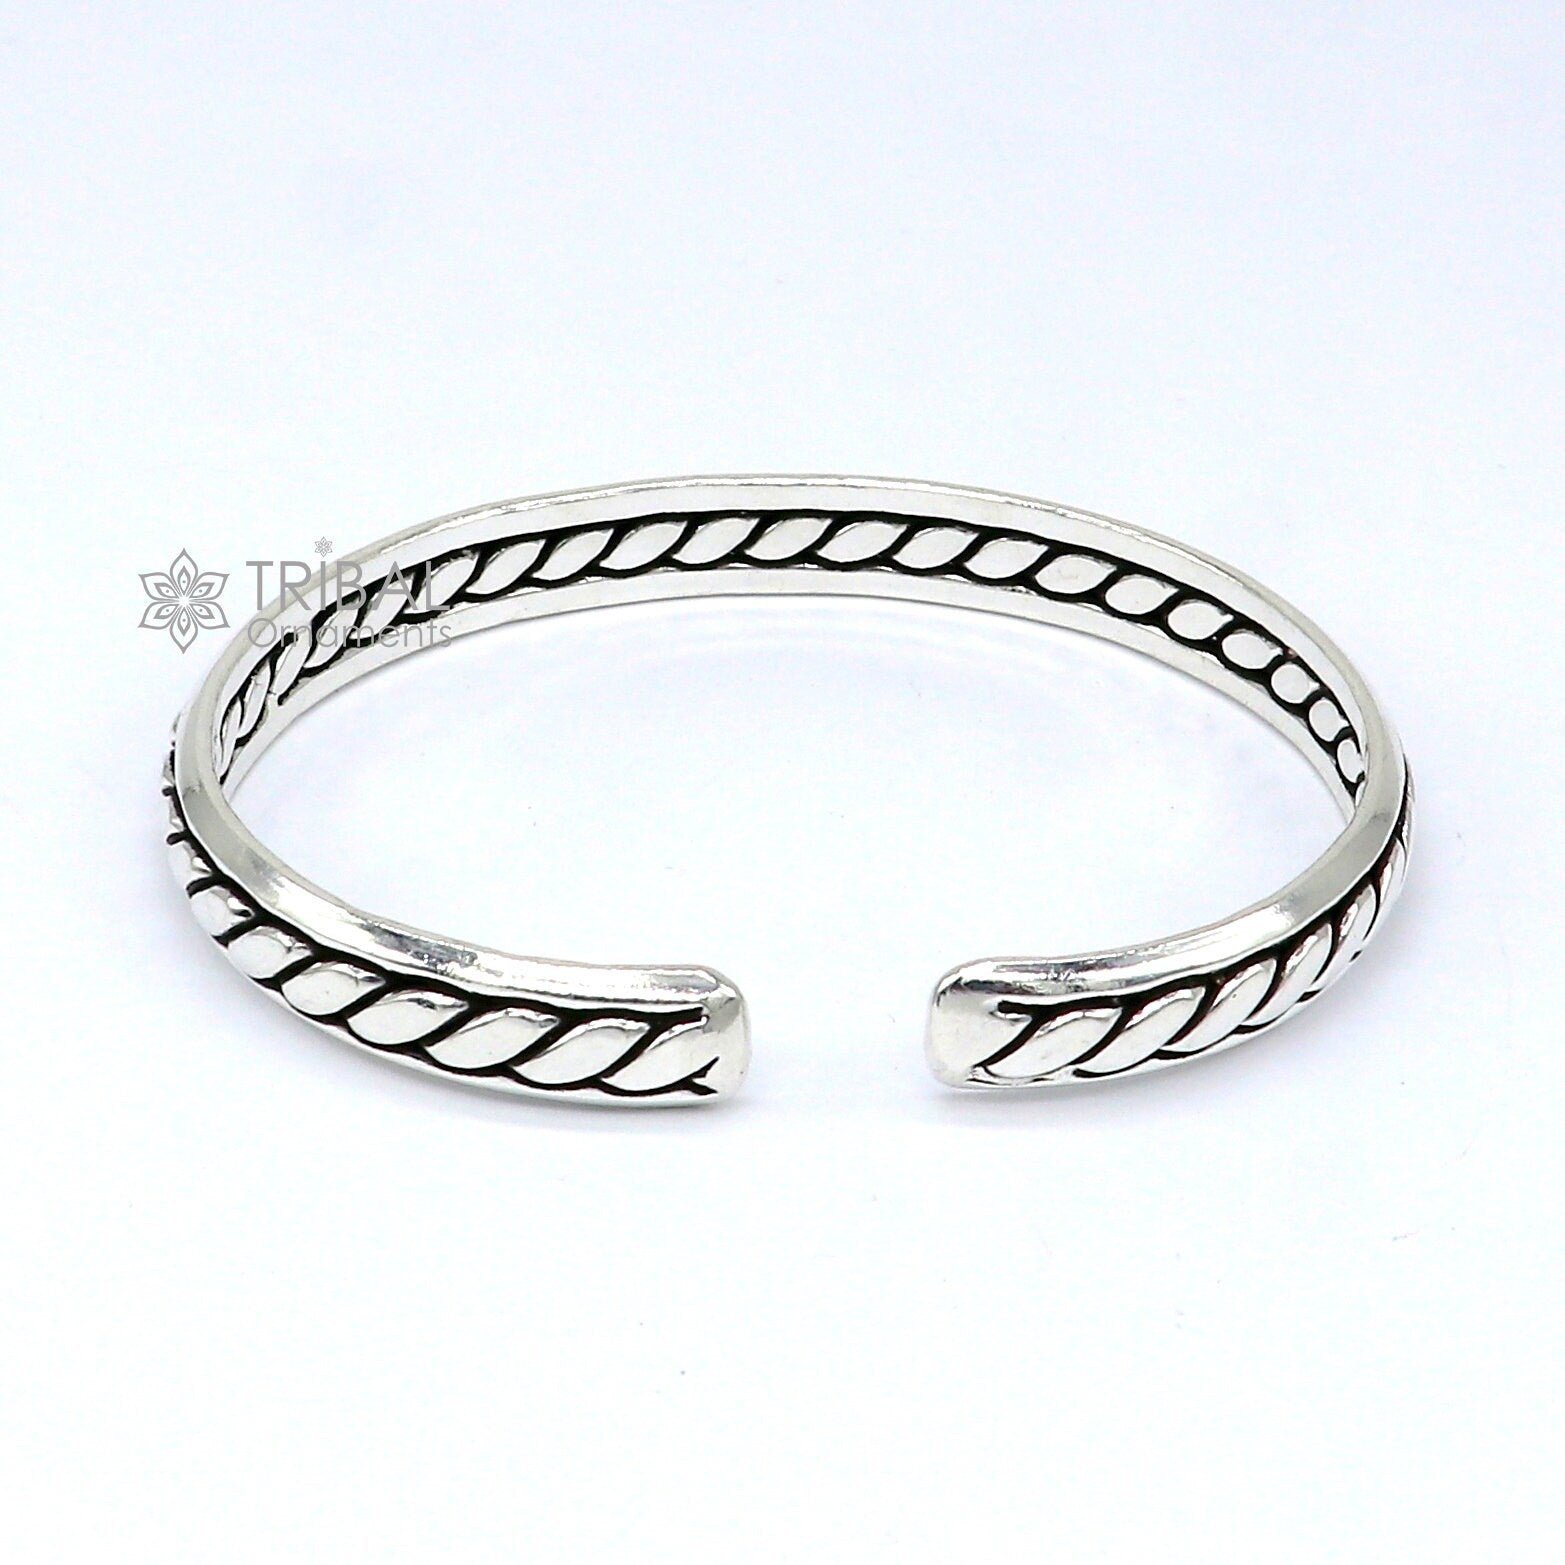 925 sterling silver handmade adjustable cuff bangle bracelet unsex gifting jewelry CUFF226 - TRIBAL ORNAMENTS